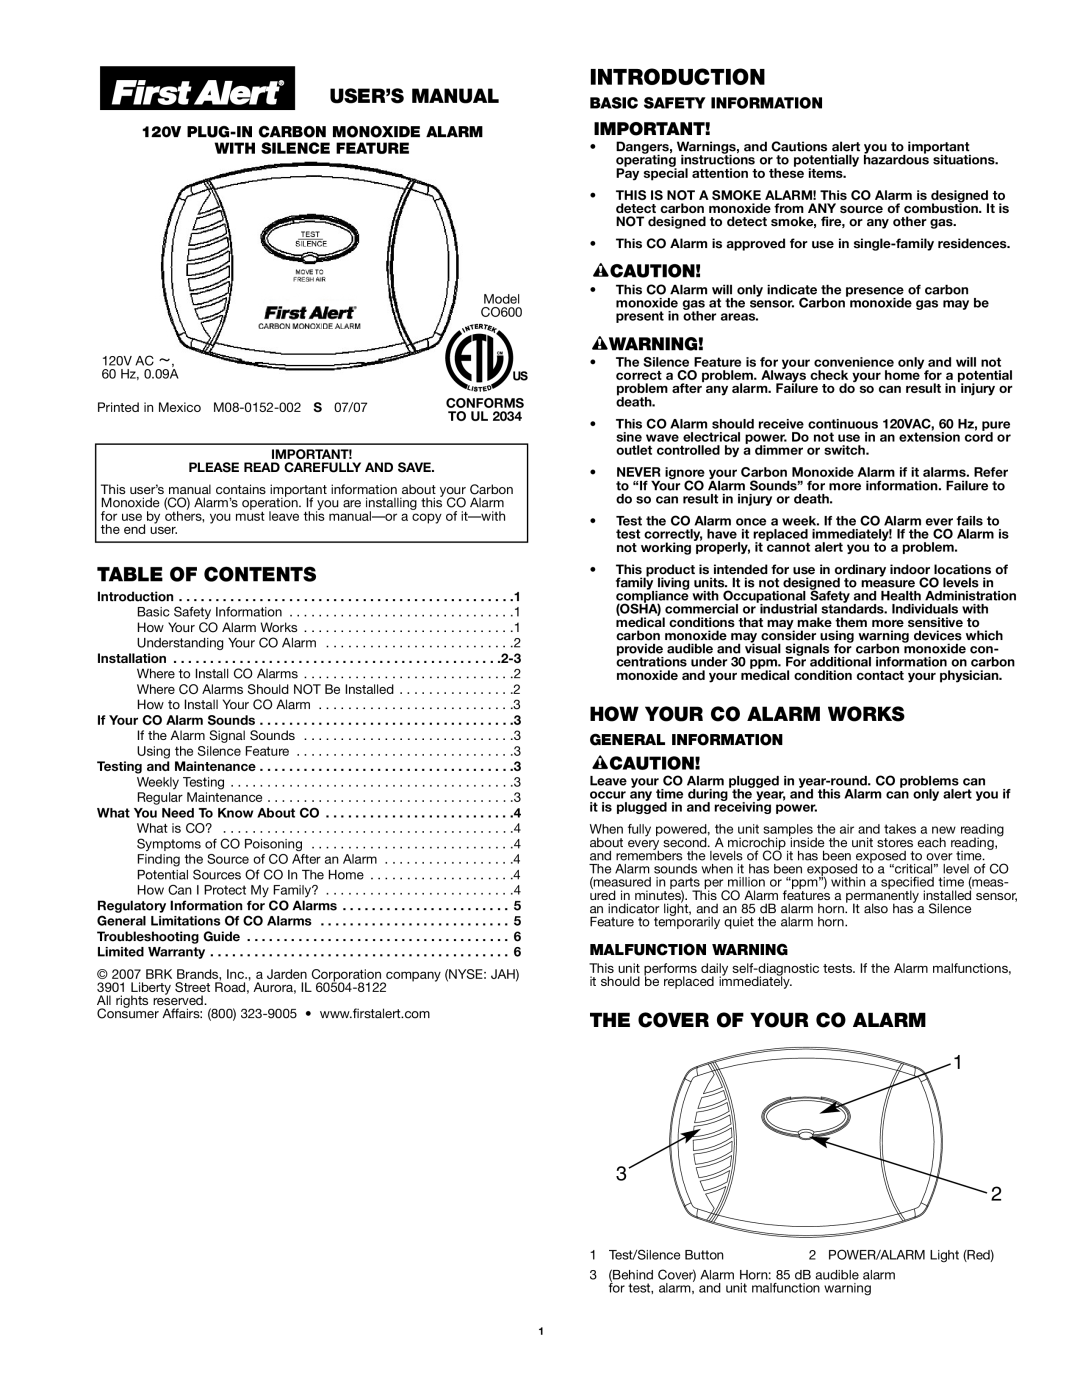 First Alert CO600 user manual Introduction, Table Of Contents, How Your Co Alarm Works, The Cover Of Your Co Alarm 